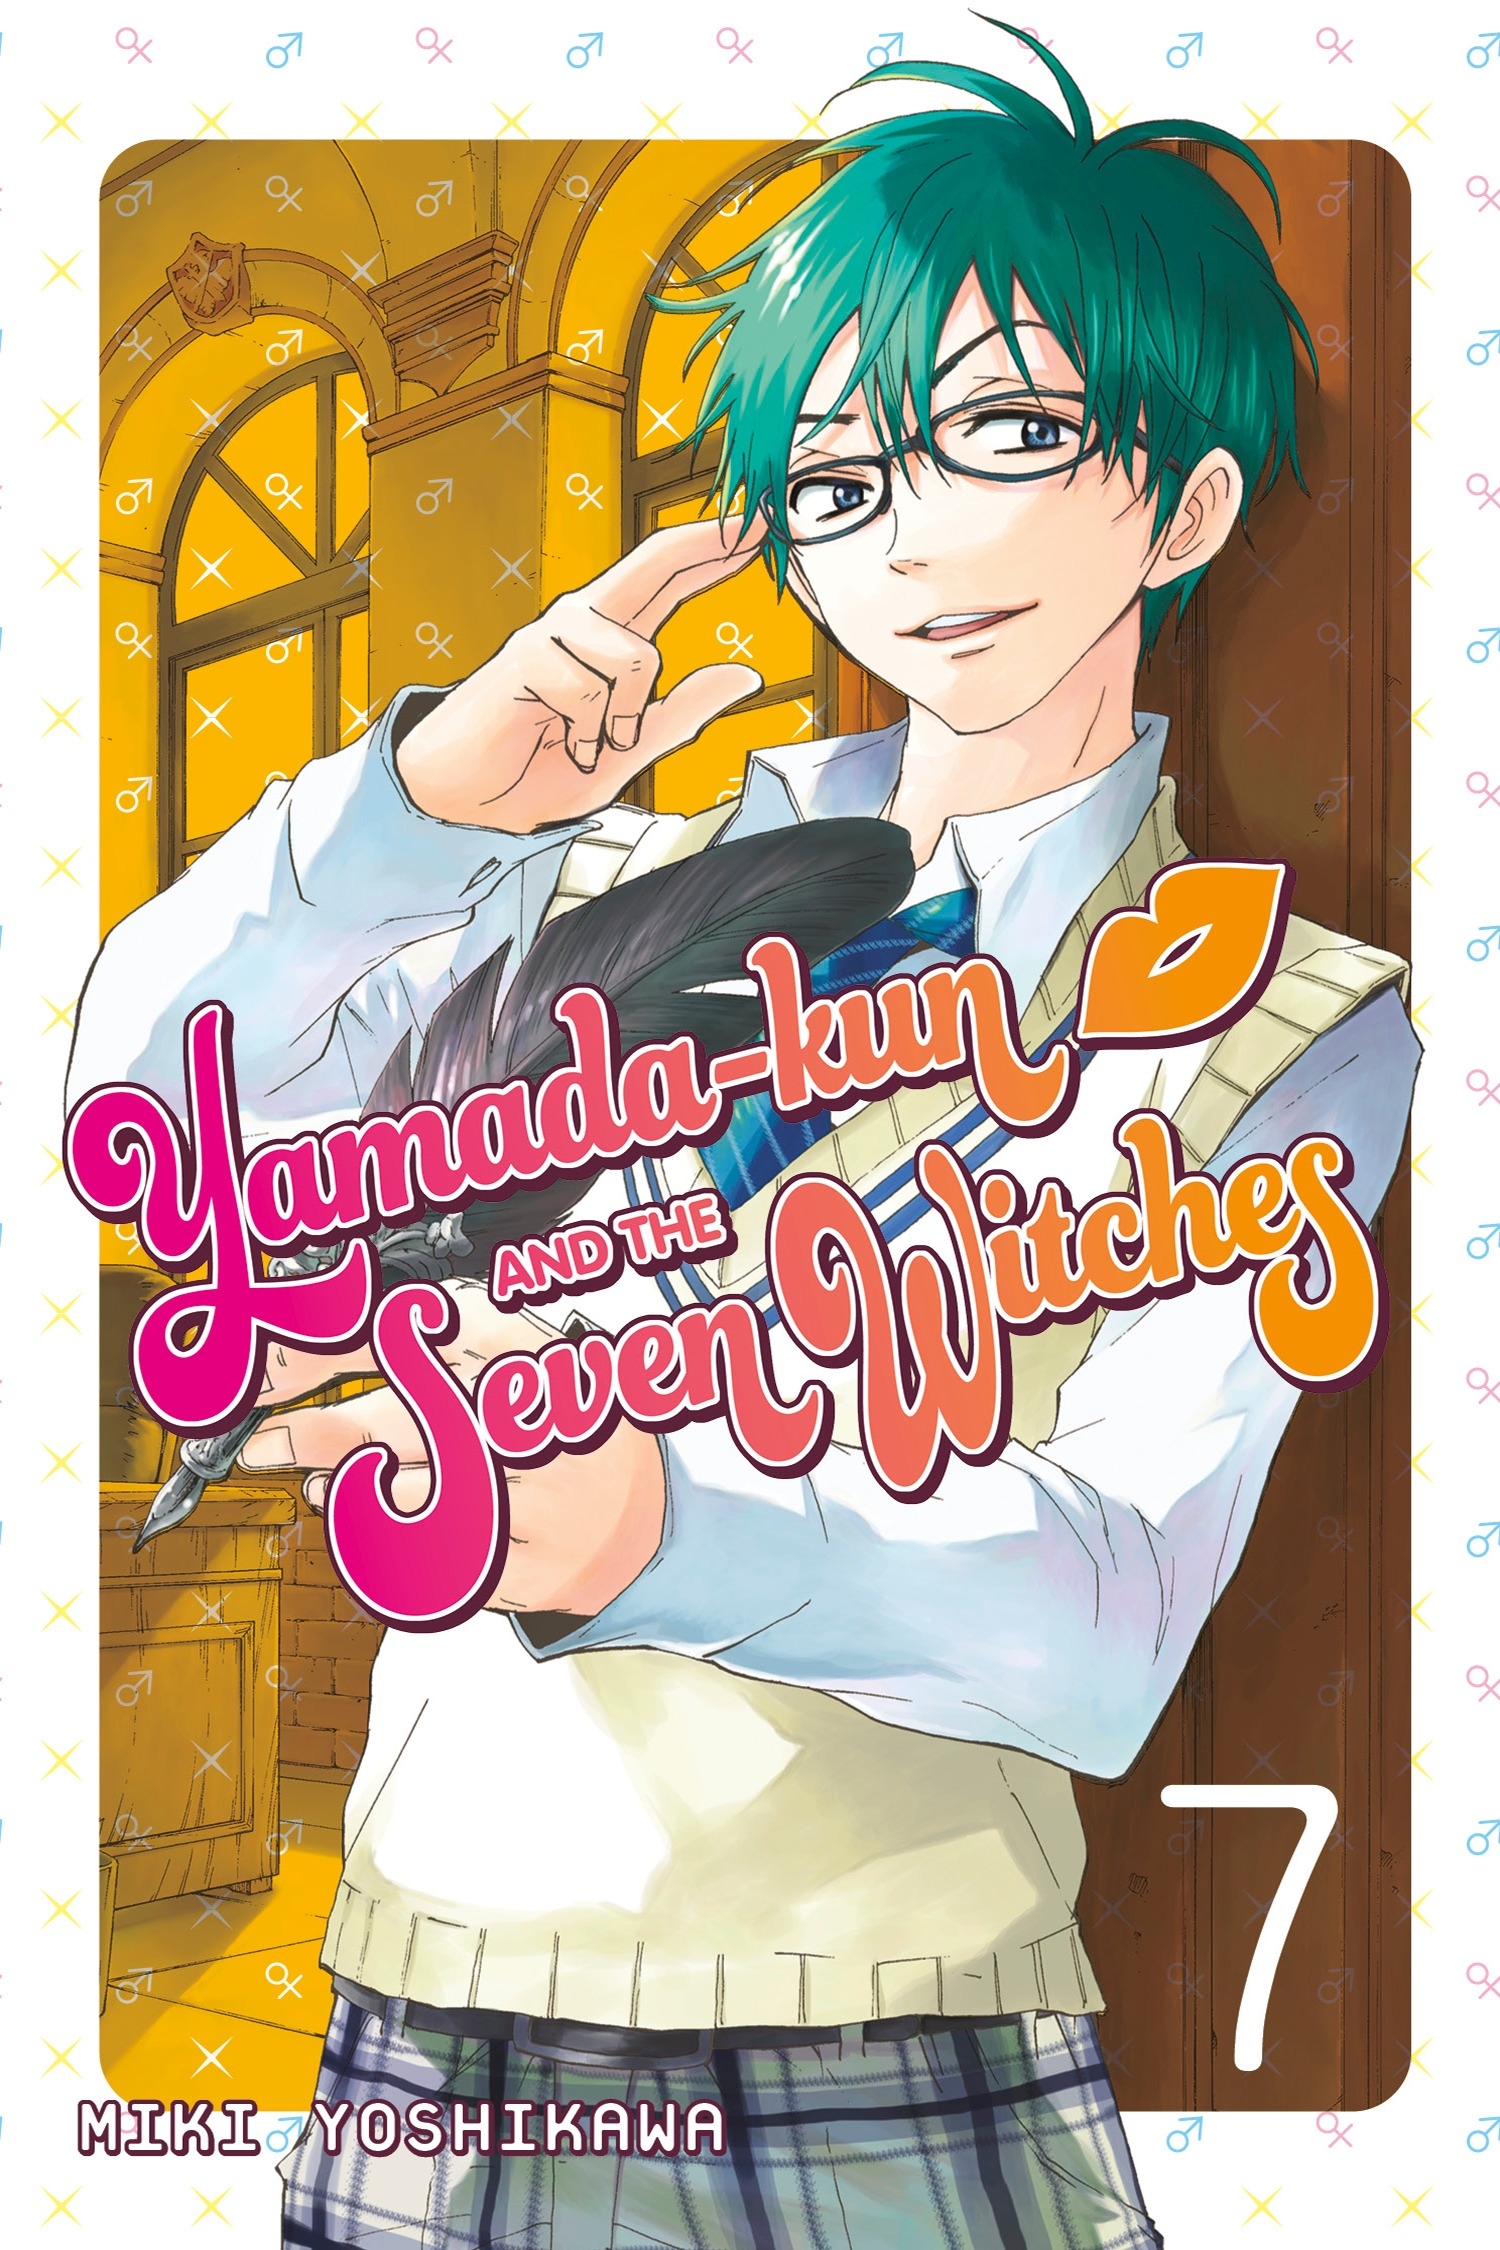 Yamada-kun and the Seven Witches, Dublapédia